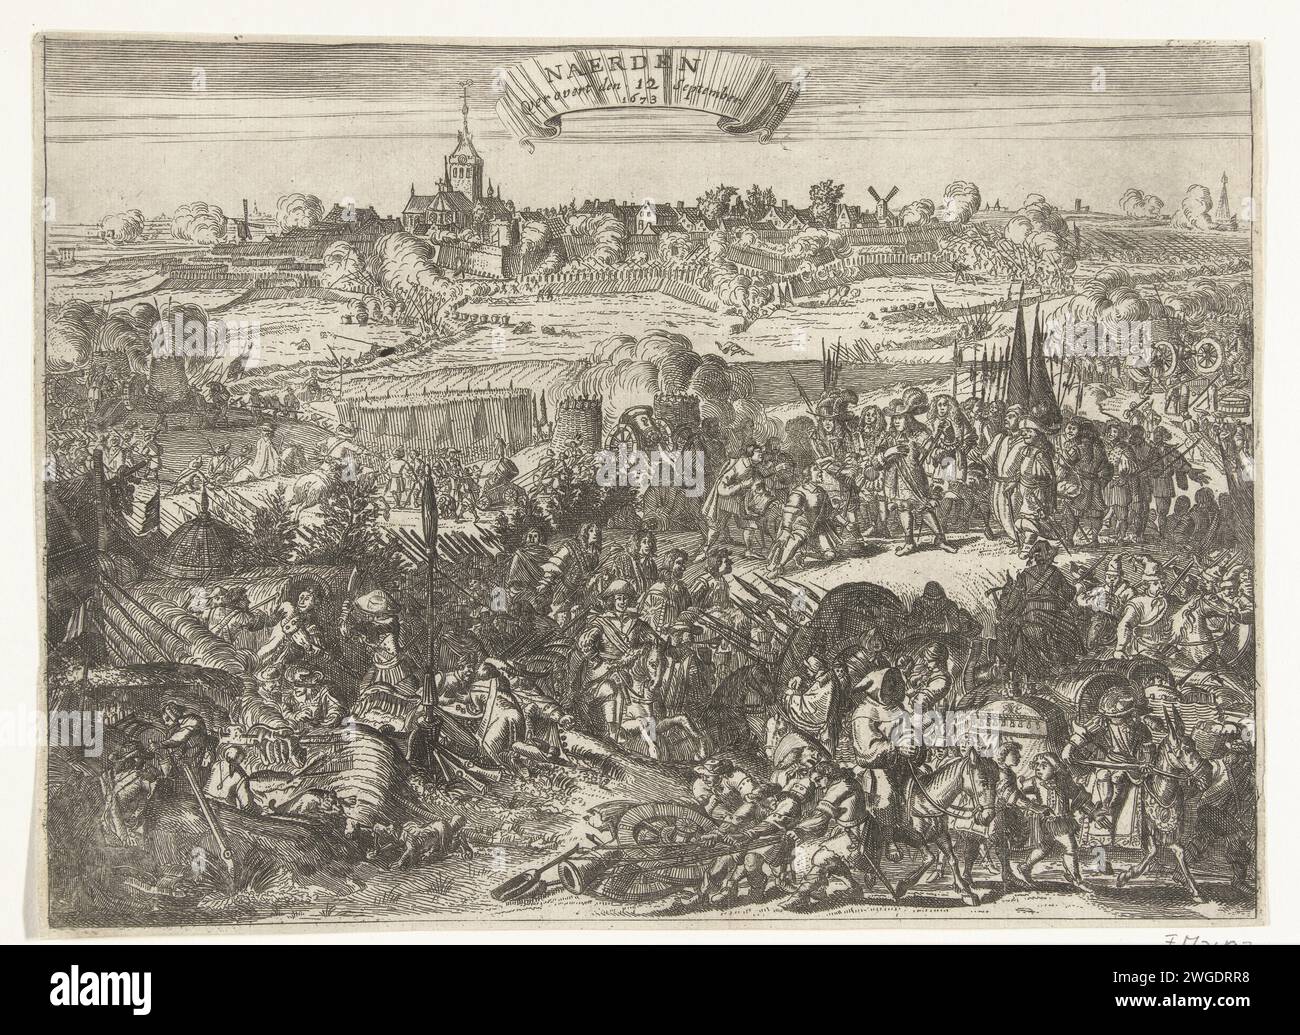 Siege and conquest of Naarden by the Prince of Orange, 1673, 1673 - 1675 print Siege and conquest of Naarden by the Prince of Orange, 12 September 1673. In the foreground scenes from the soldier life in the army camp. In the middle, the mayor of Naarden kneels for the prince who is surrounded by his staff of officers. In the distance the siege and the storming of the city. Northern Netherlands paper etching / engraving siege, position war. capture of city (after the siege) Naarden Stock Photo